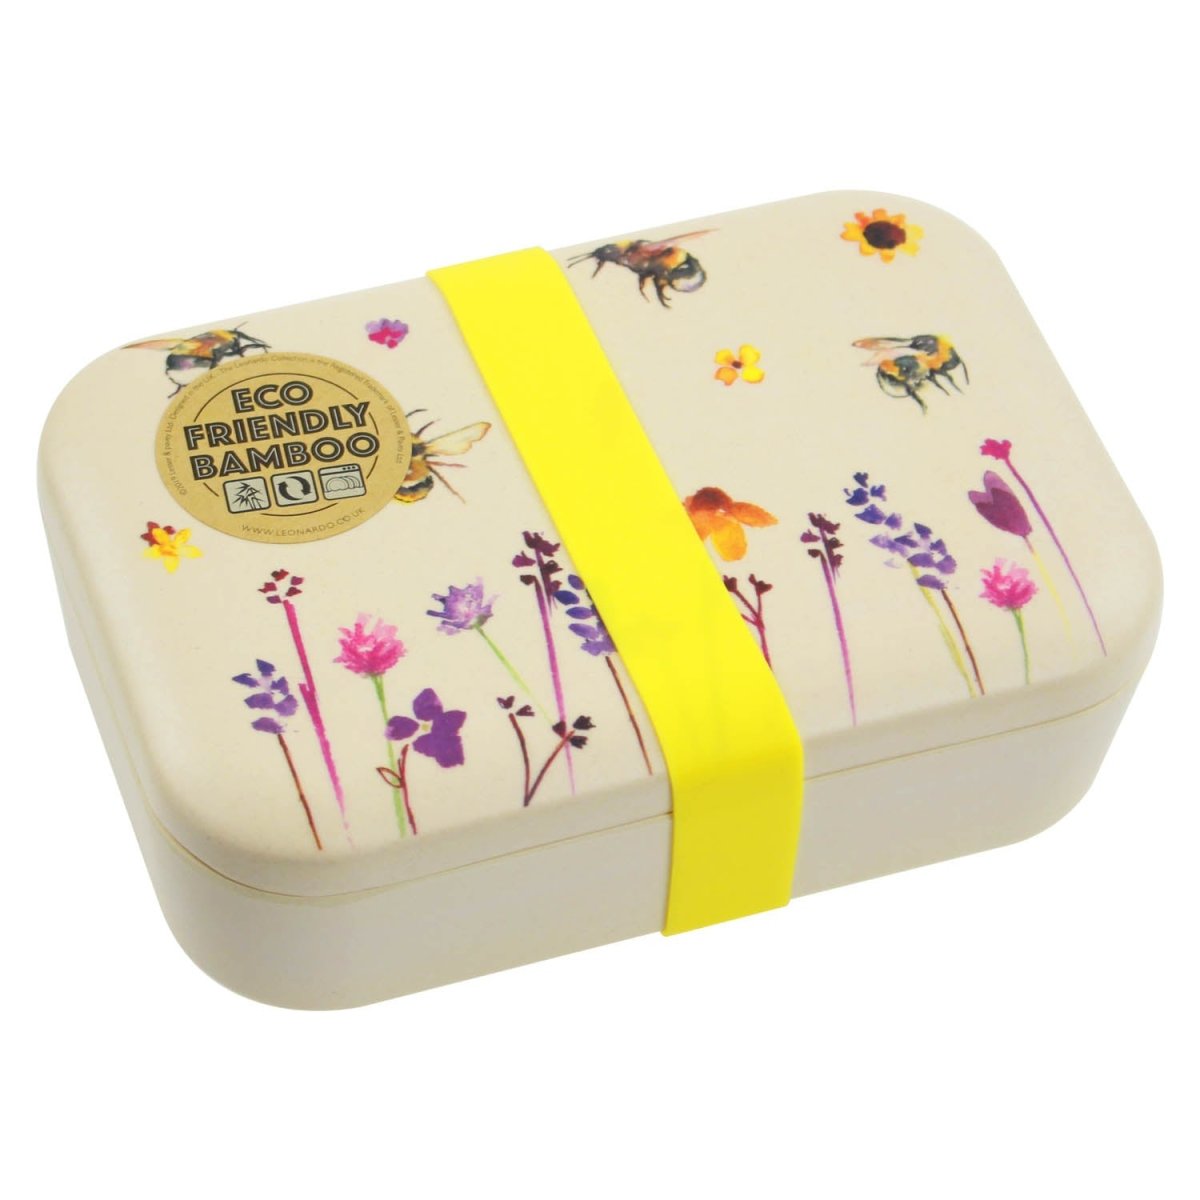 Eco-Friendly Bamboo Bees & Flowers Lunch Bento Box - Bonnypack